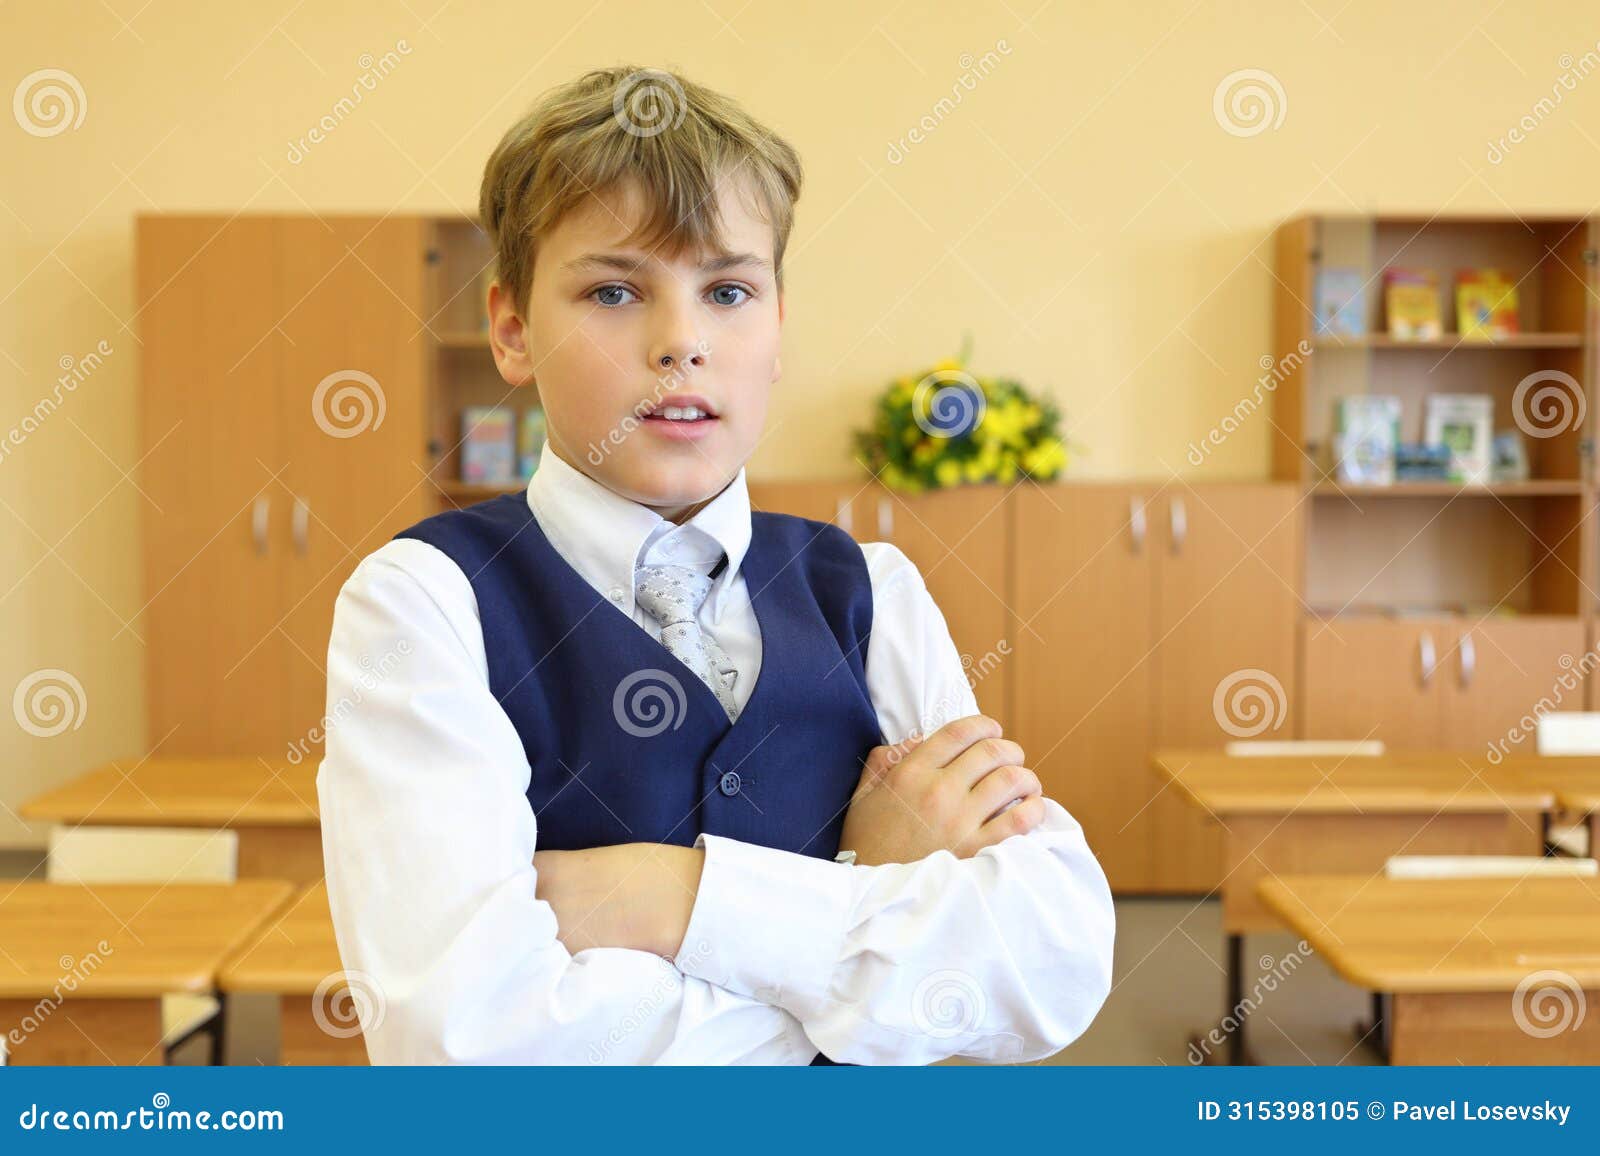 boy with crossed arms stands in empty classroom